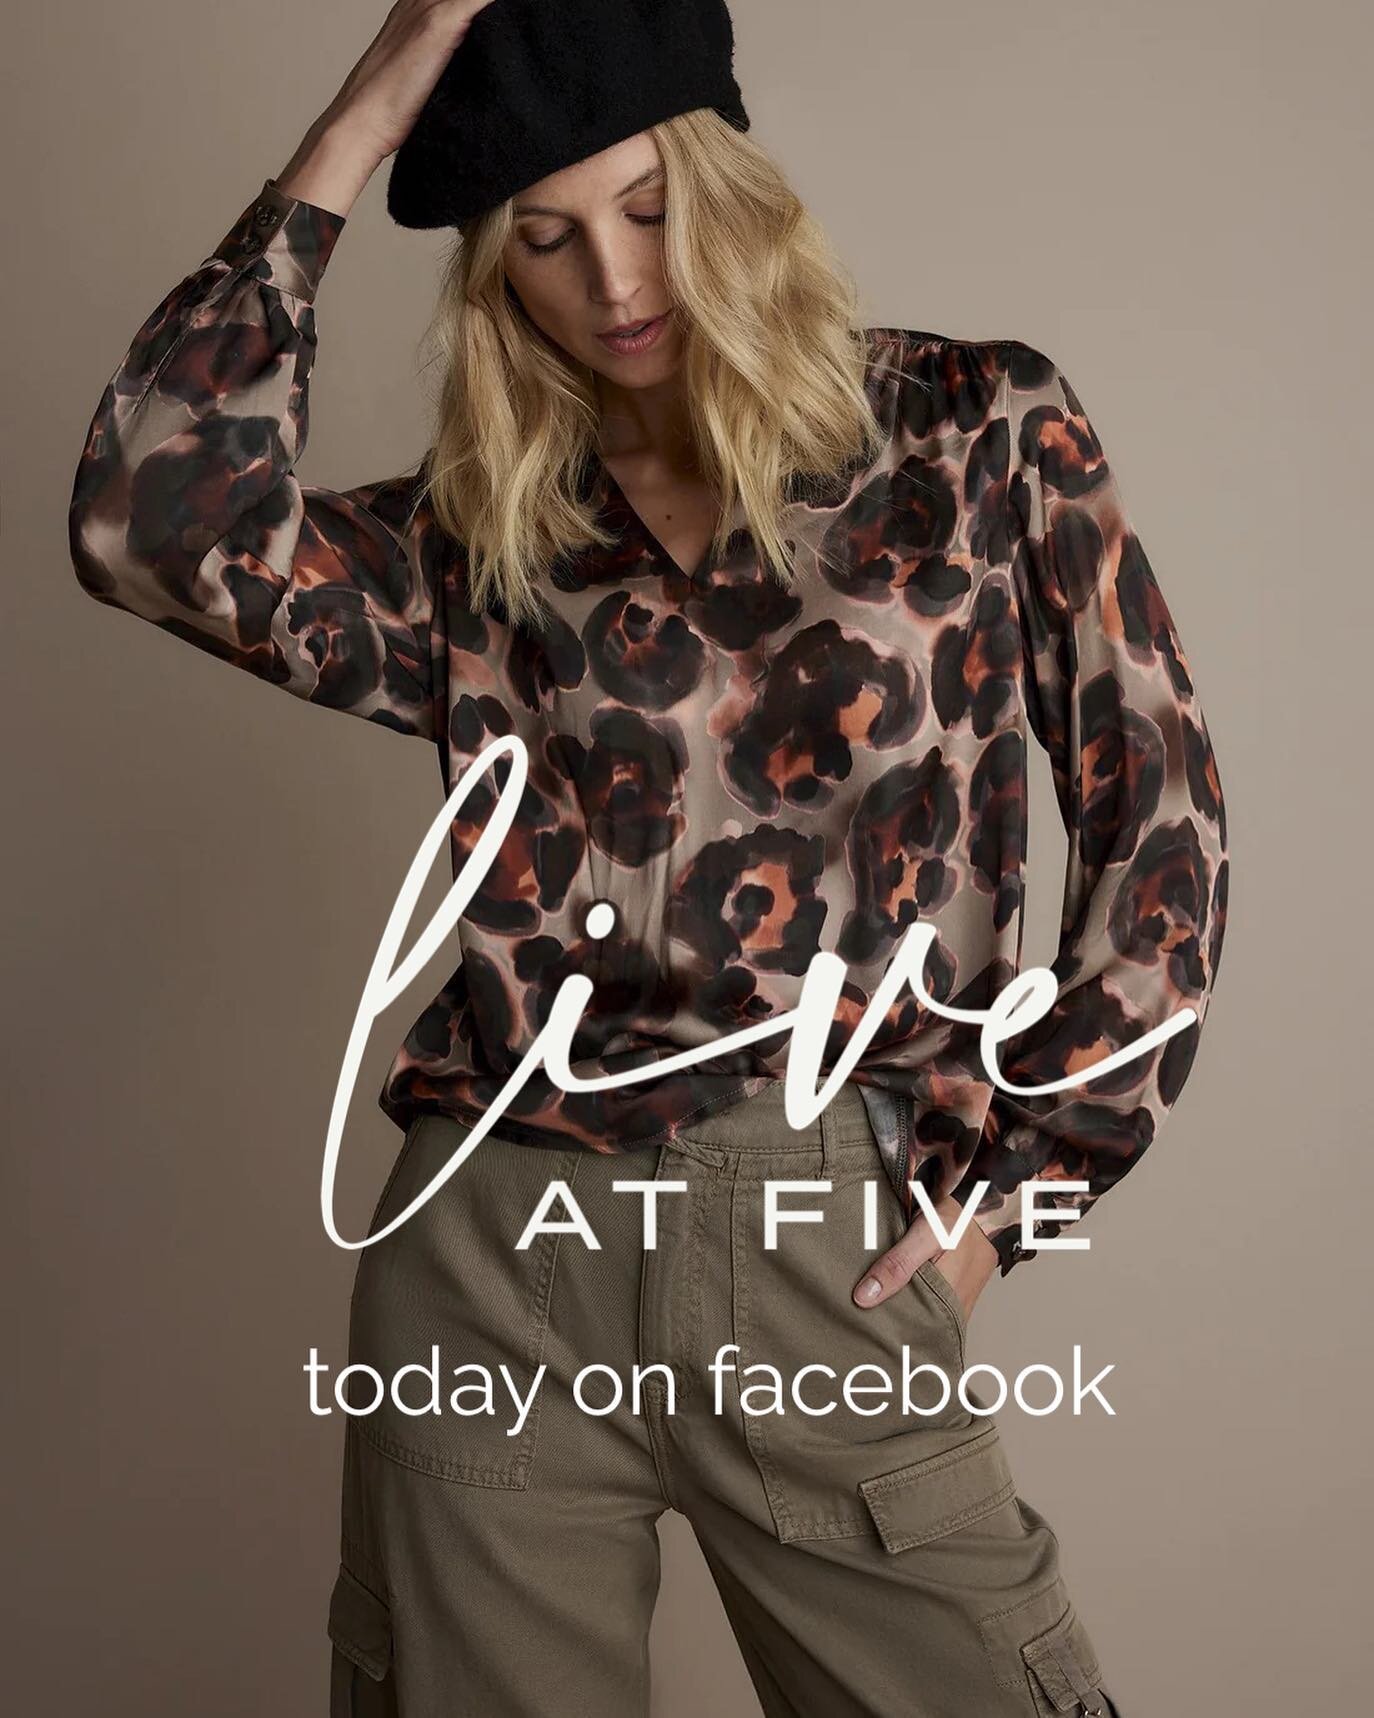 Don&rsquo;t miss our Live at Five today on facebook. New arrivals from @summumwoman and a sprinkle of what holiday looks like. Tis the season girls.

#dressingroomcoach 
#shopvestas 
#lookgoodfeelgood 
#fashion 
#style 
#newarrivals